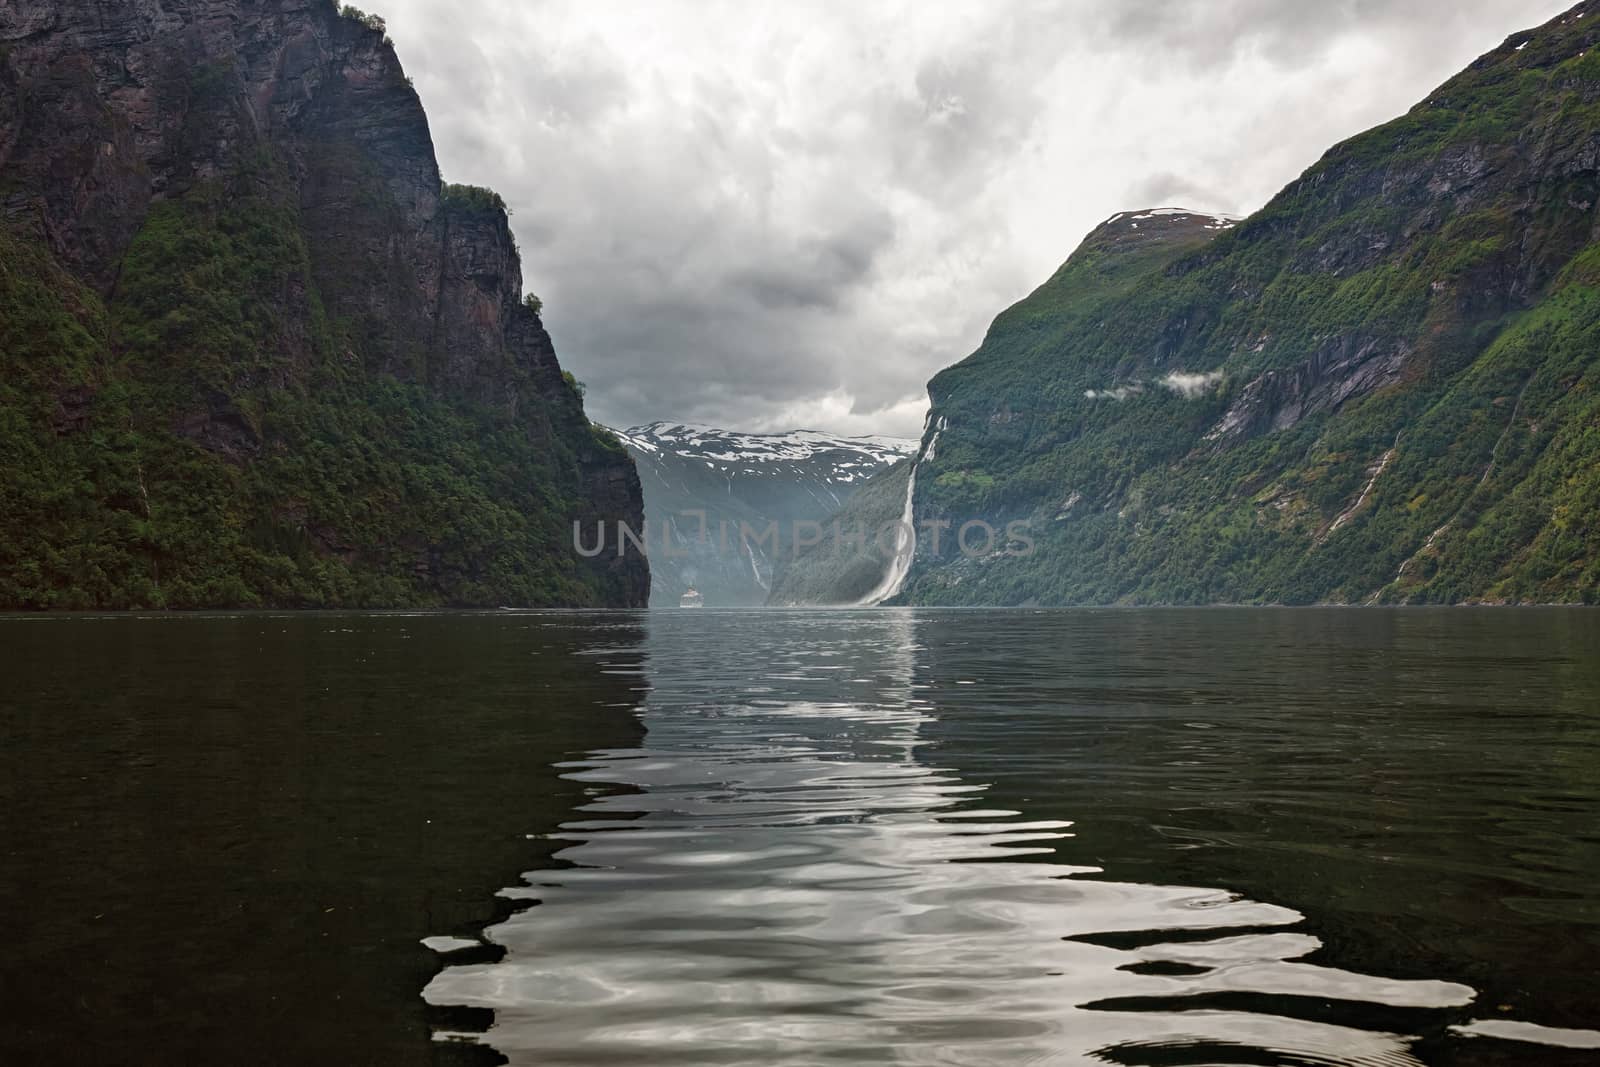 Sailing in the fjord near Geiranger, Norway